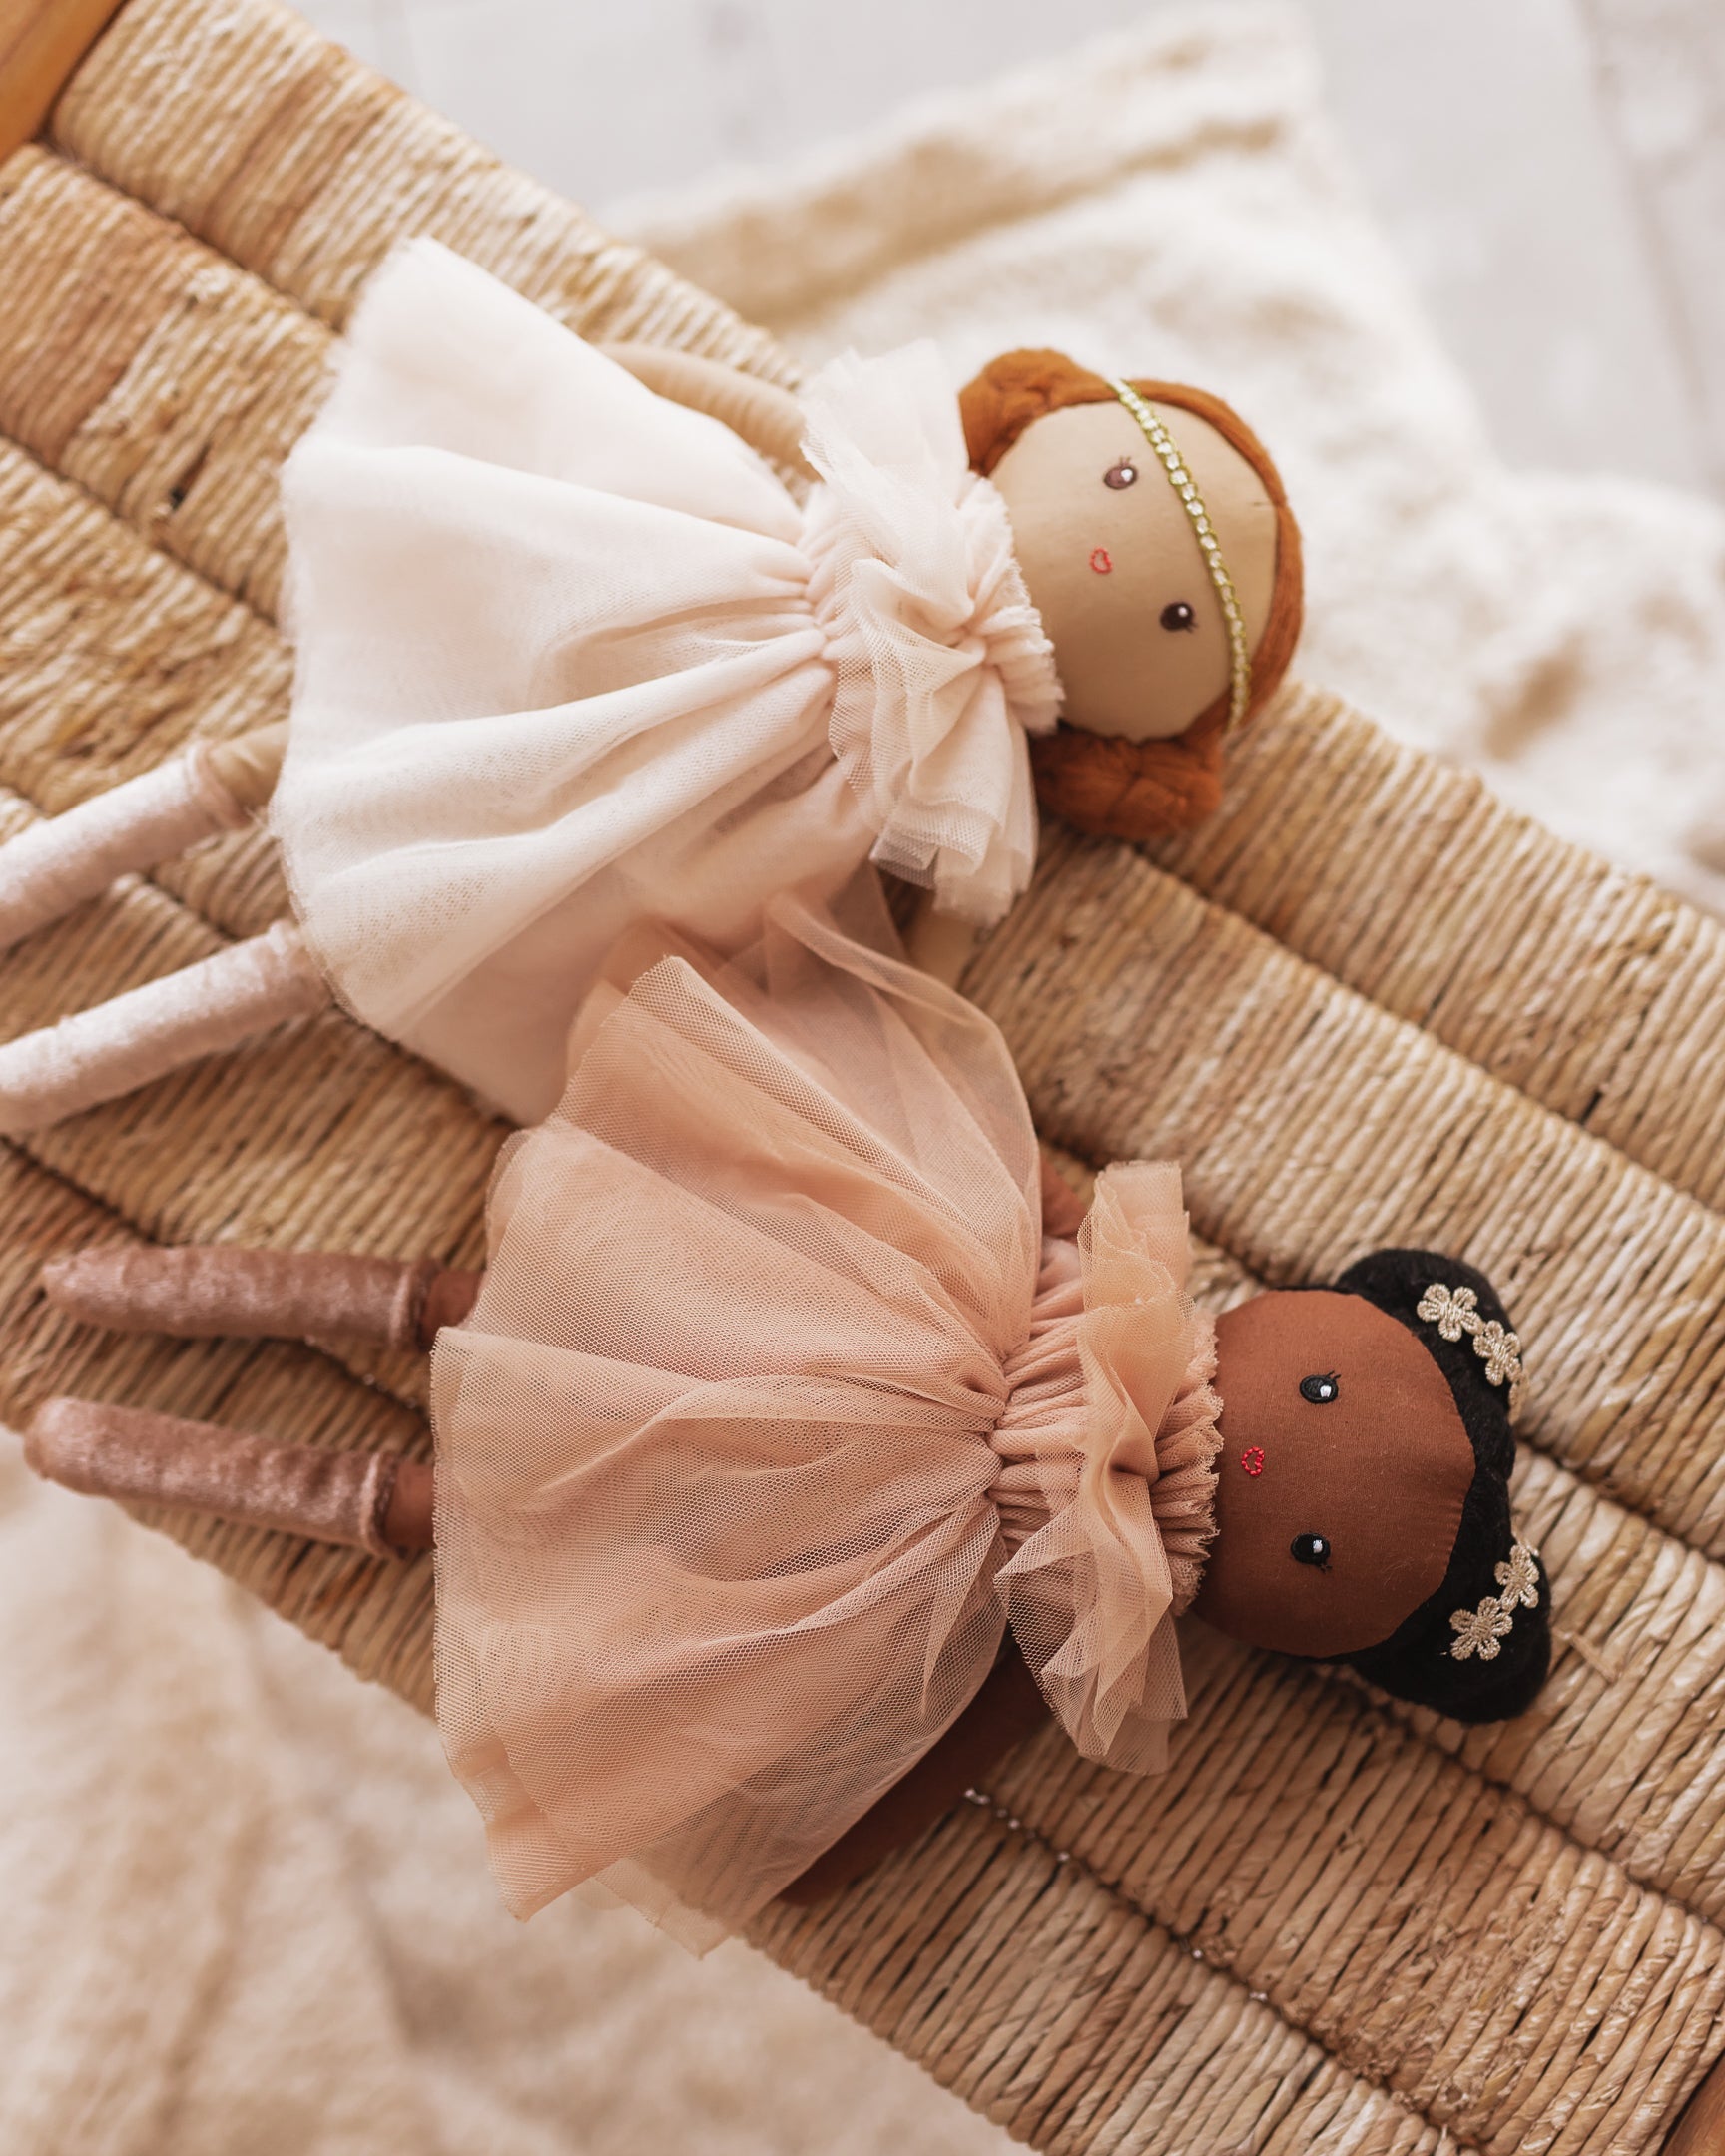 Puppe Dollies | Lilly Toots - Puppen